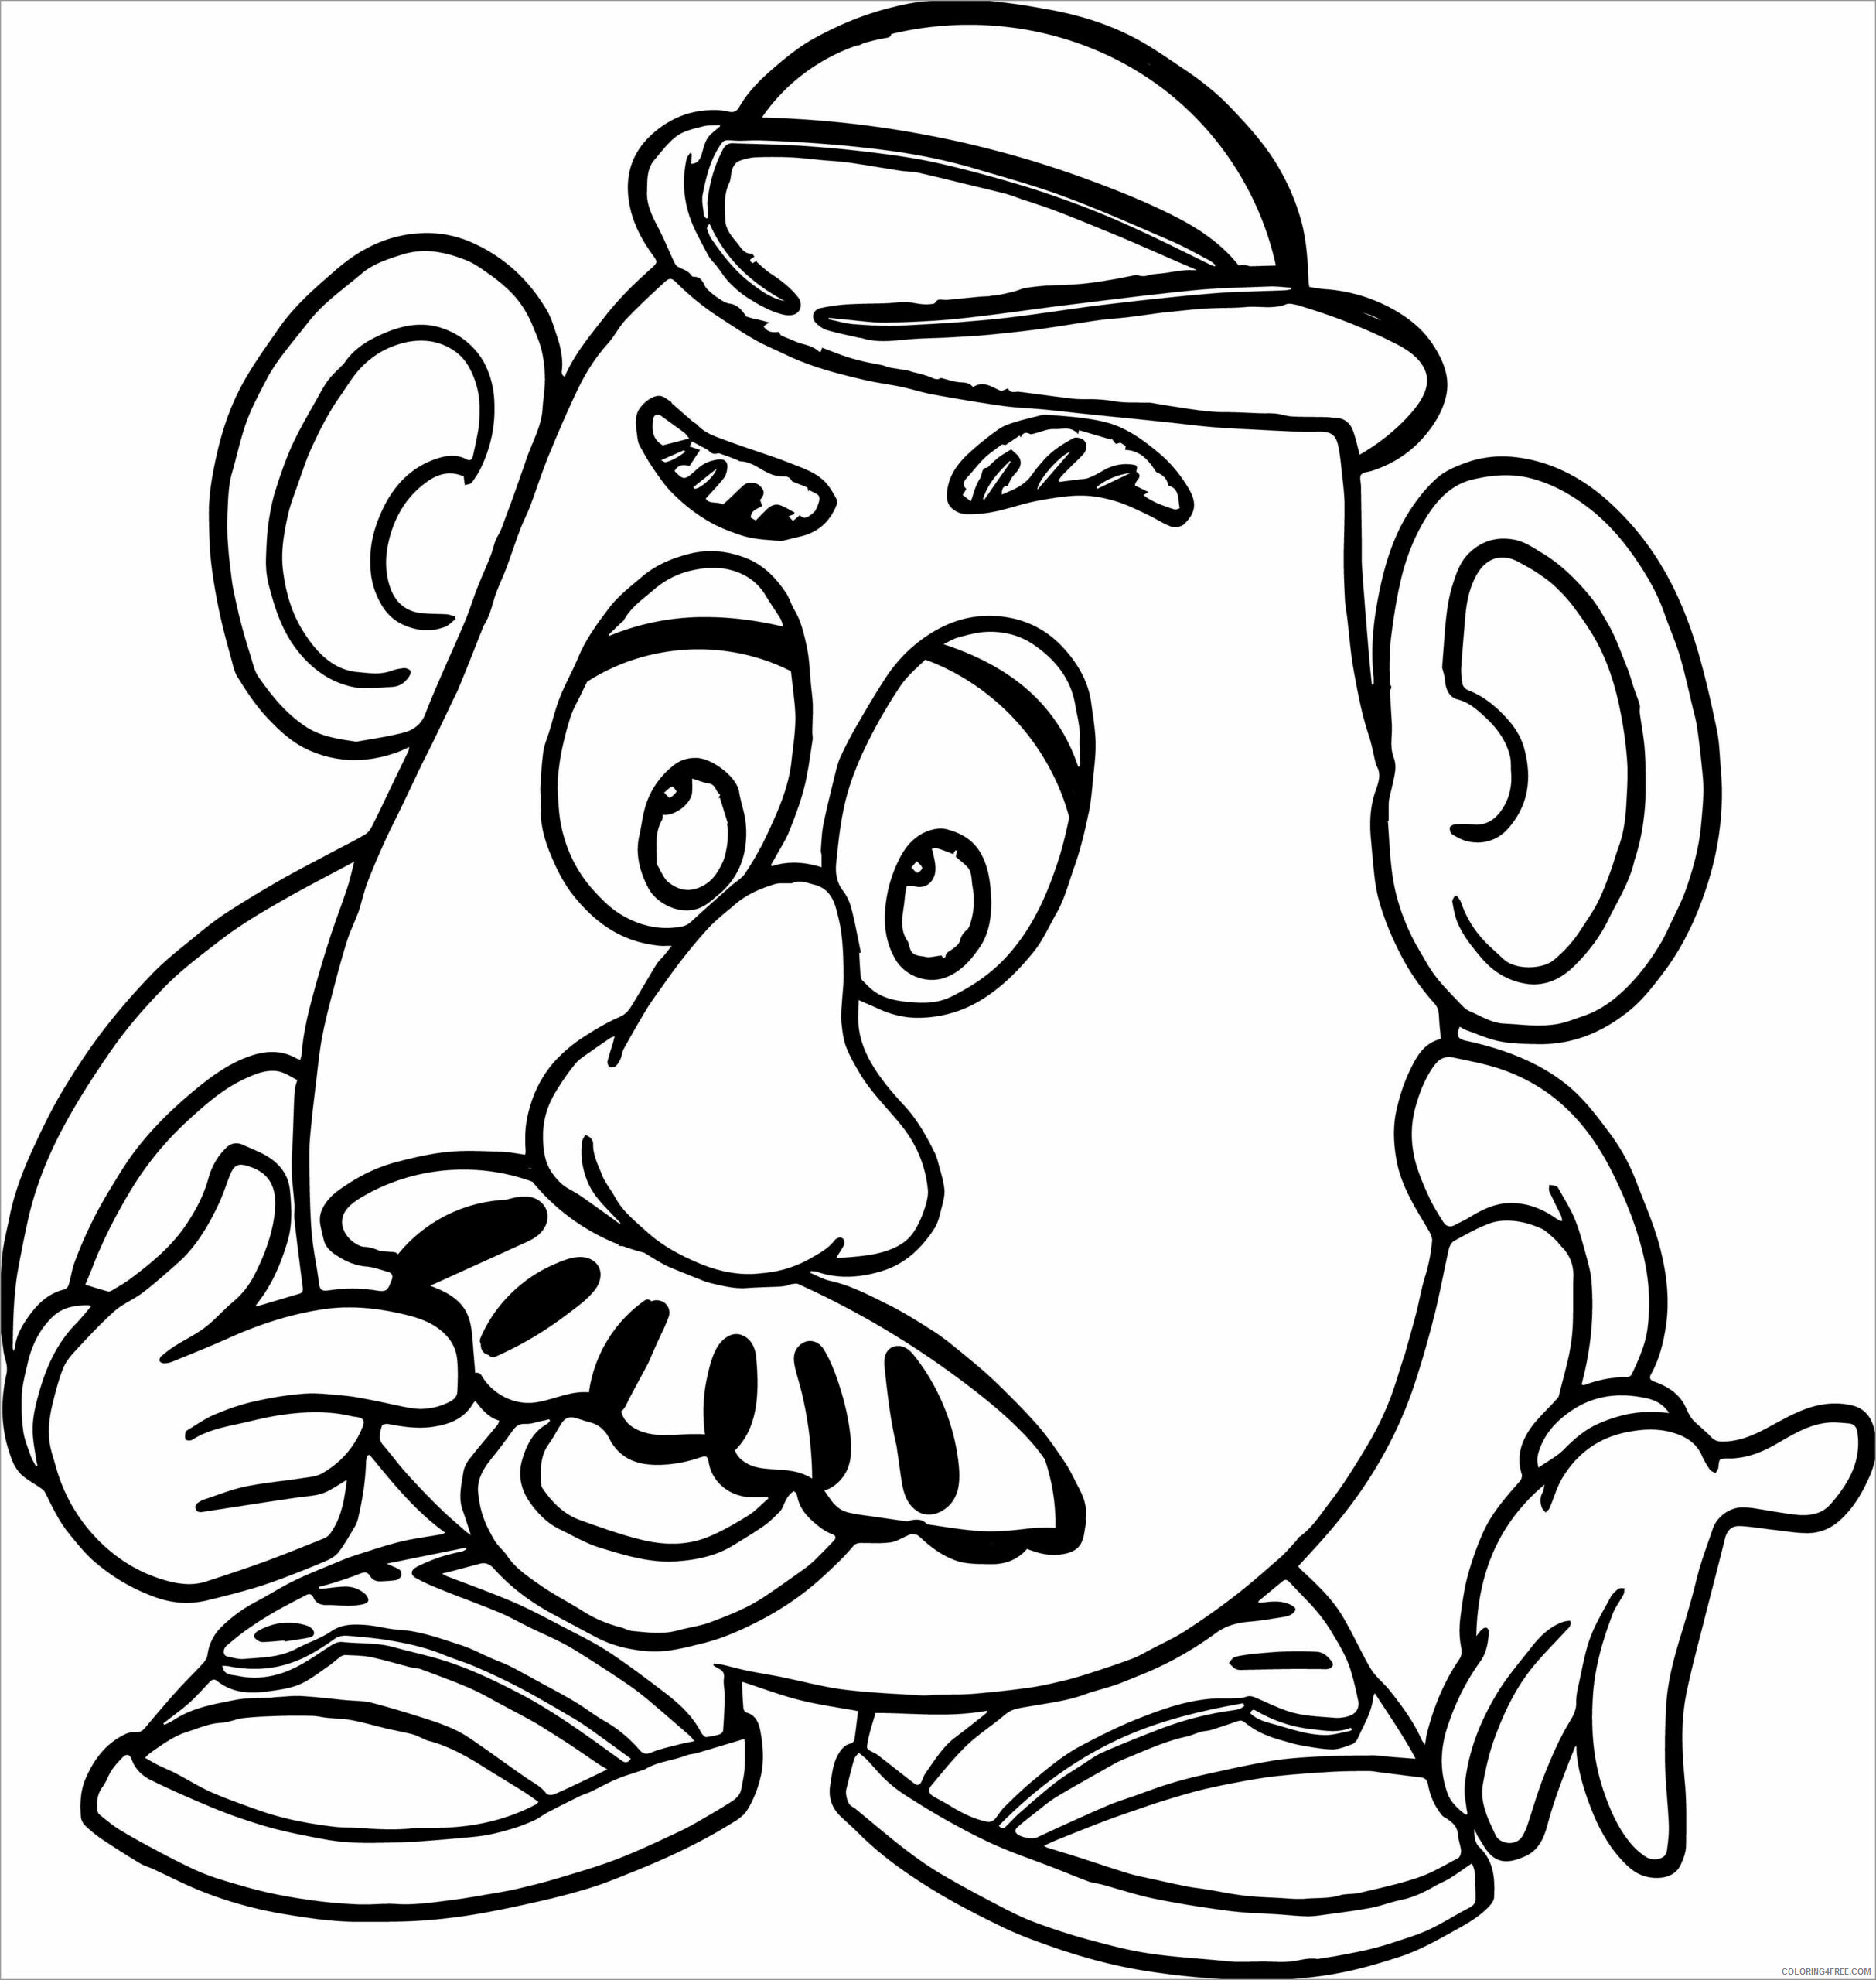 Mr Potato Head Coloring Pages mr potato head for kids Printable 2021 4288 Coloring4free